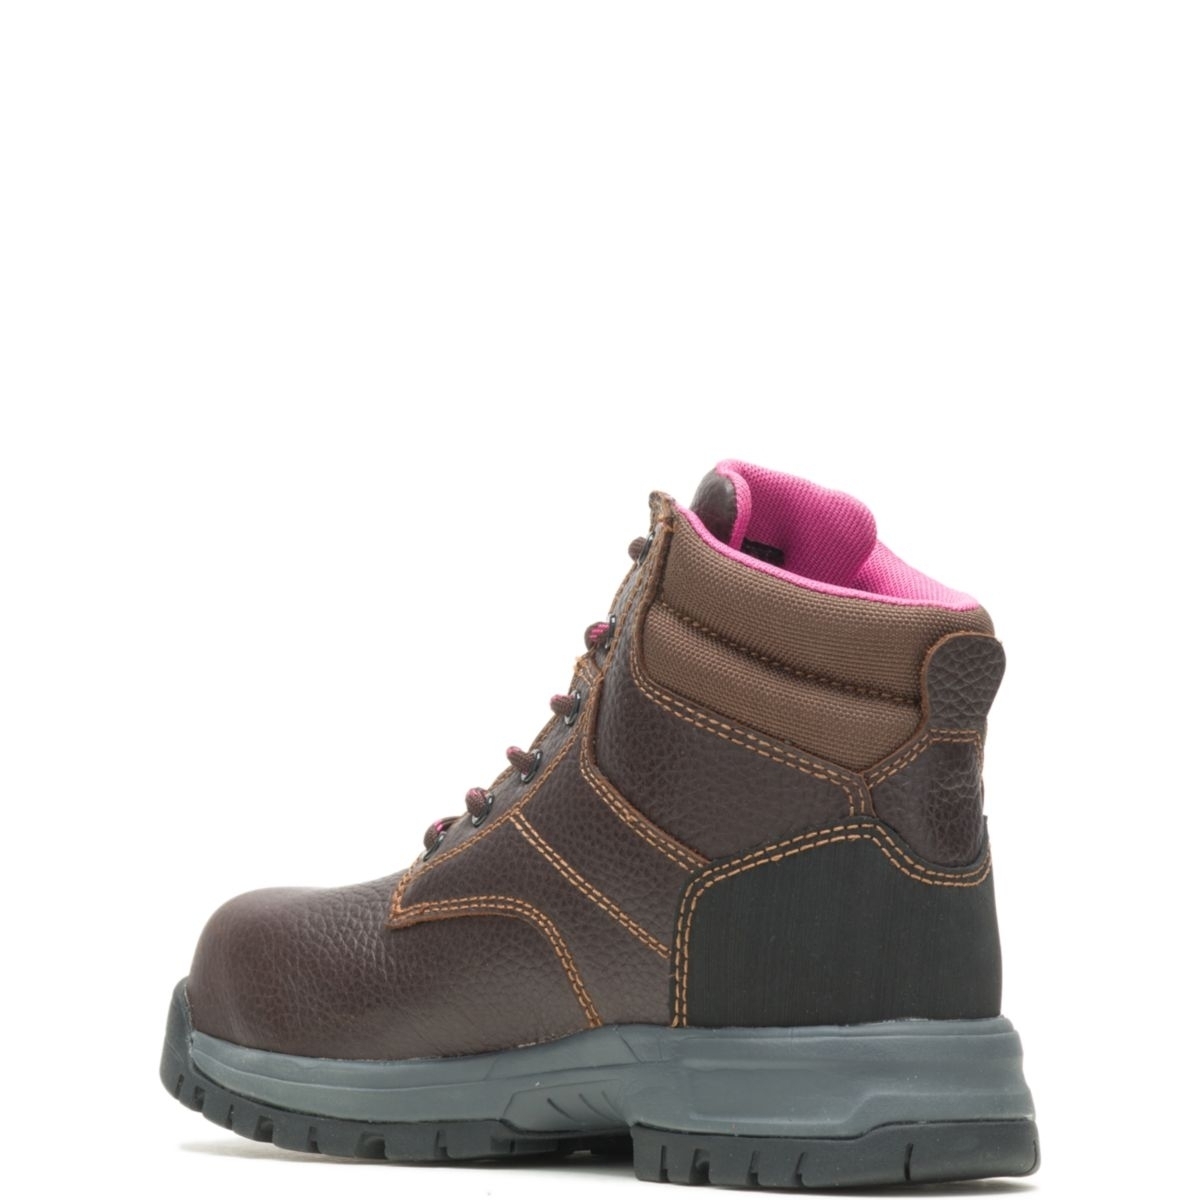 WOLVERINE Women's Piper Composite Toe Work Boot Brown - W10180 BROWN - BROWN, 7.5-D